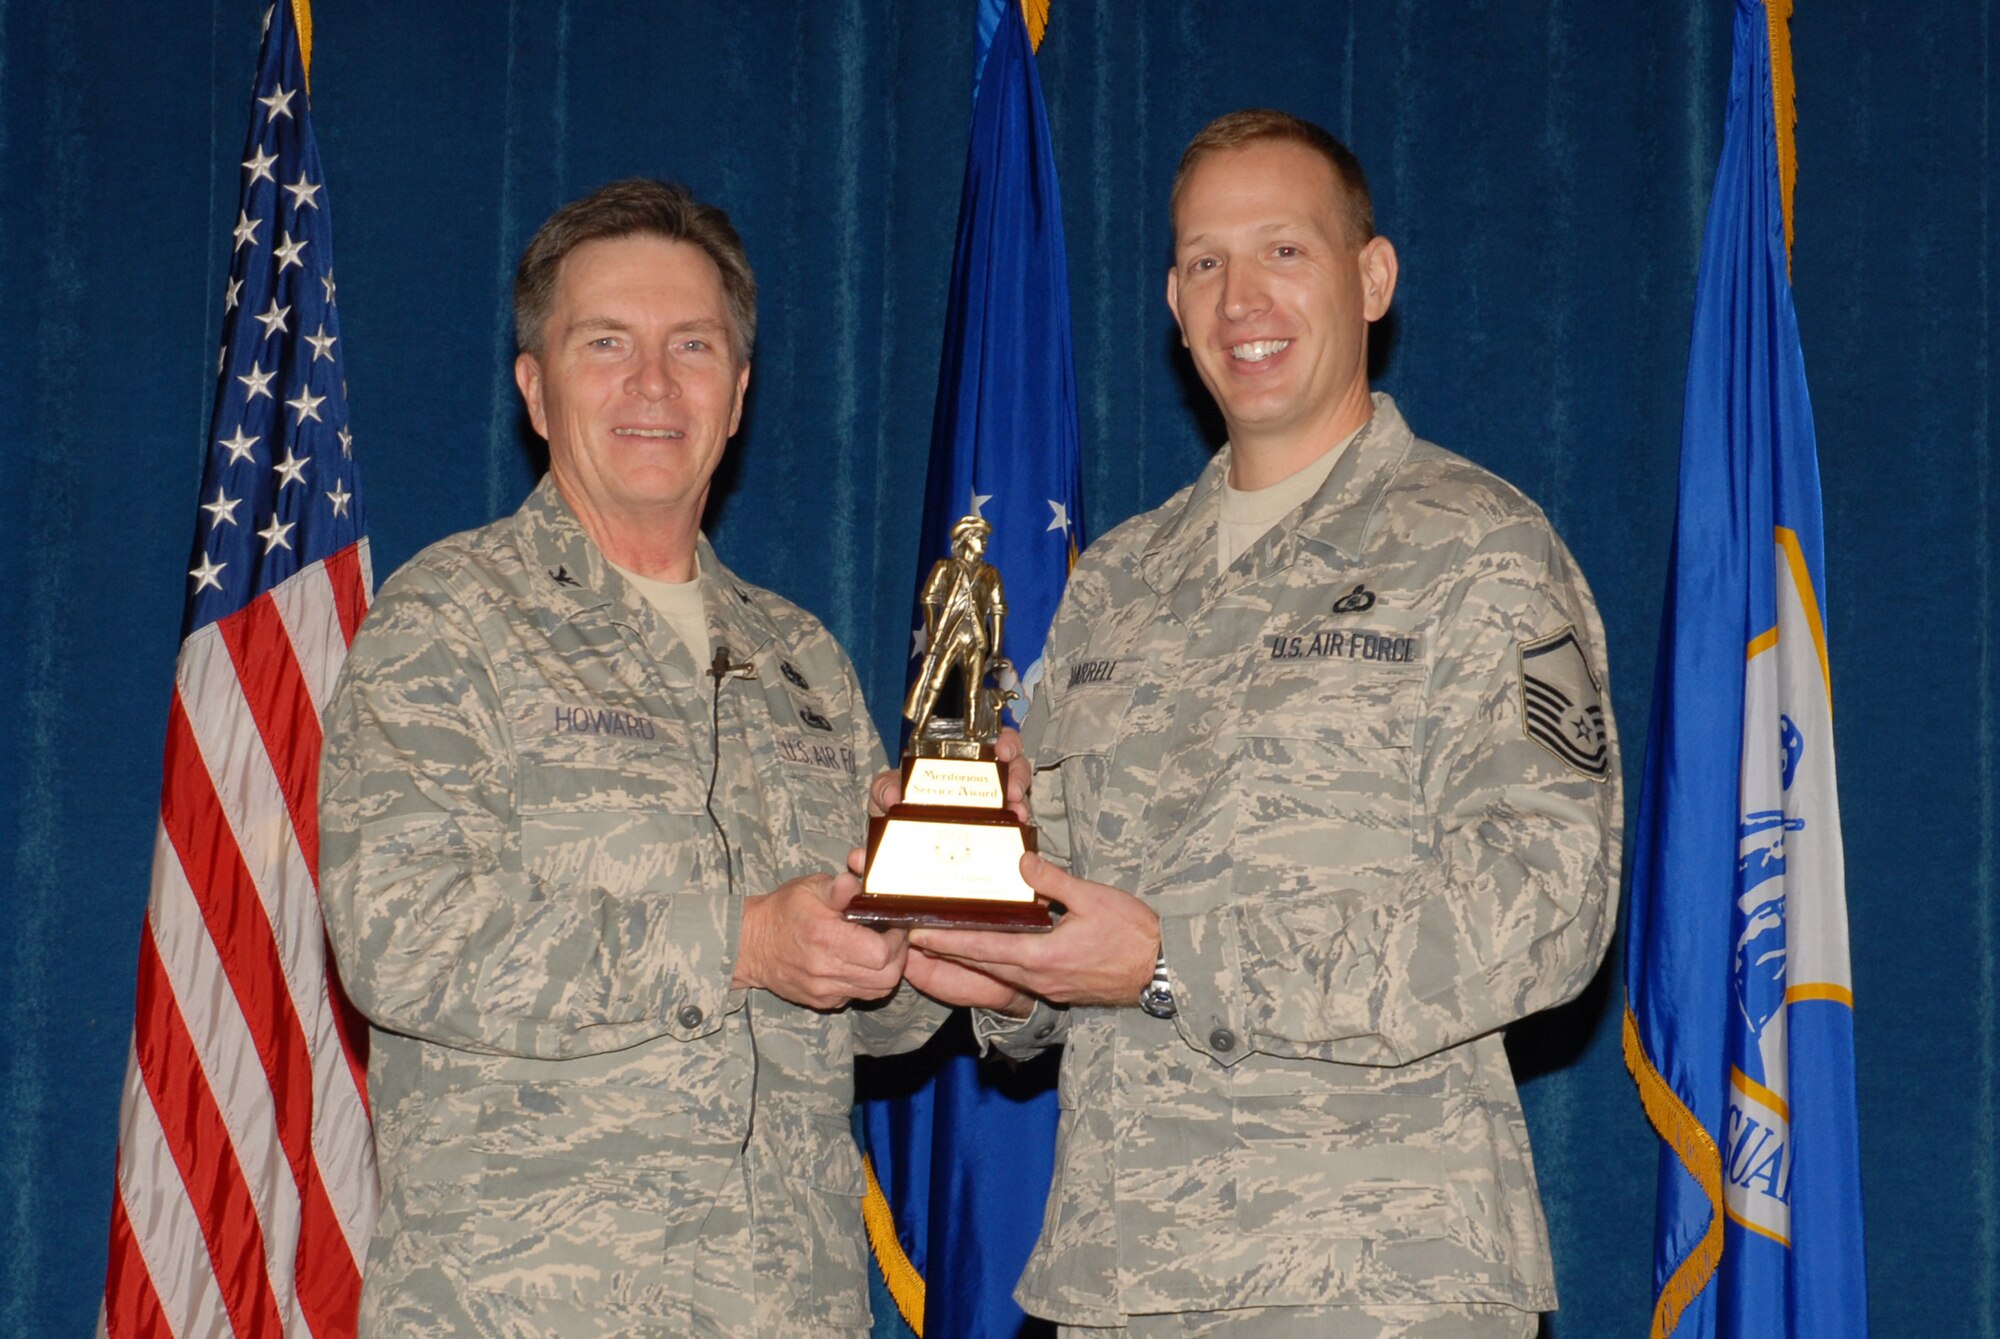 McGHEE TYSON AIR NATIONAL GUARD BASE, Tenn. -- Master Sgt. Herbert J. Harrell, right, an enlisted professional military education instructor, receives the meritorious service award from Col. Richard B. Howard, commander, upon his departure from assignment at The I.G. Brown Air National Guard Training and Education Center here, Dec. 18, 2009. (U.S. Air Force photograph by Master Sgt. Mavi Smith/Released)